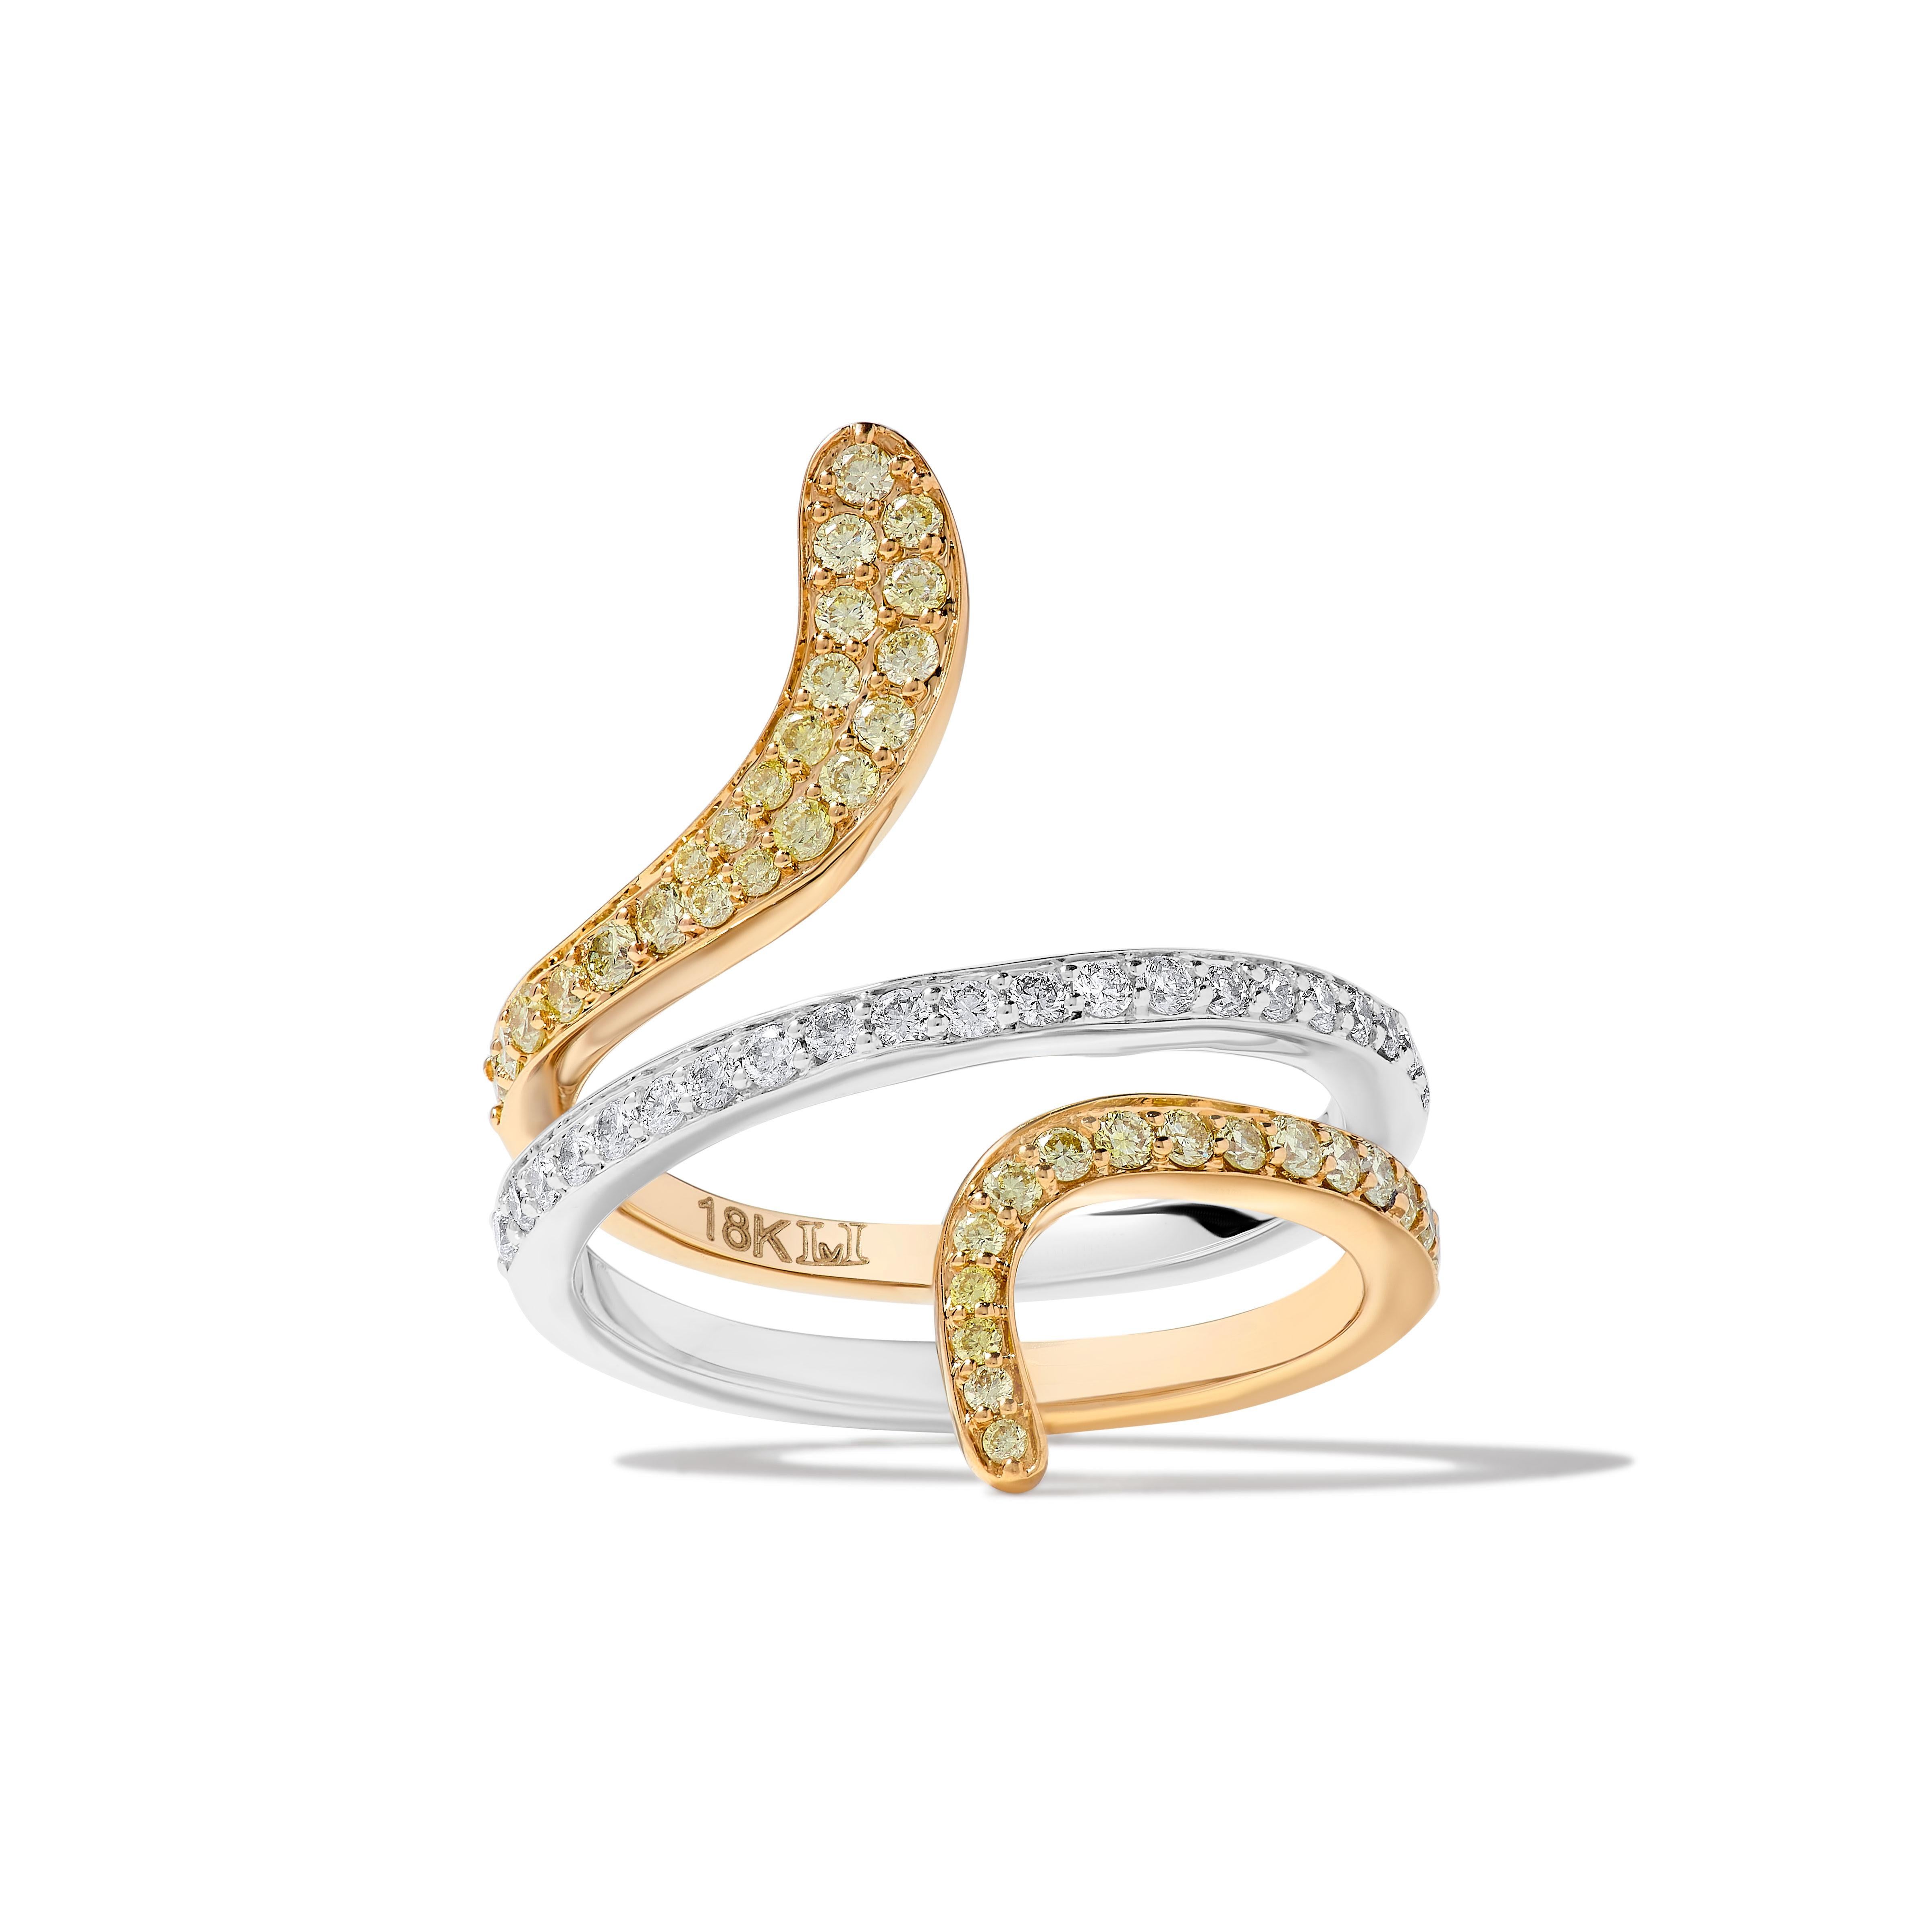 RareGemWorld's classic diamond band. Mounted in a beautiful 18K Yellow and White Gold setting with natural round cut yellow diamonds complimented by natural round white diamond melee. This band is guaranteed to impress and enhance your personal